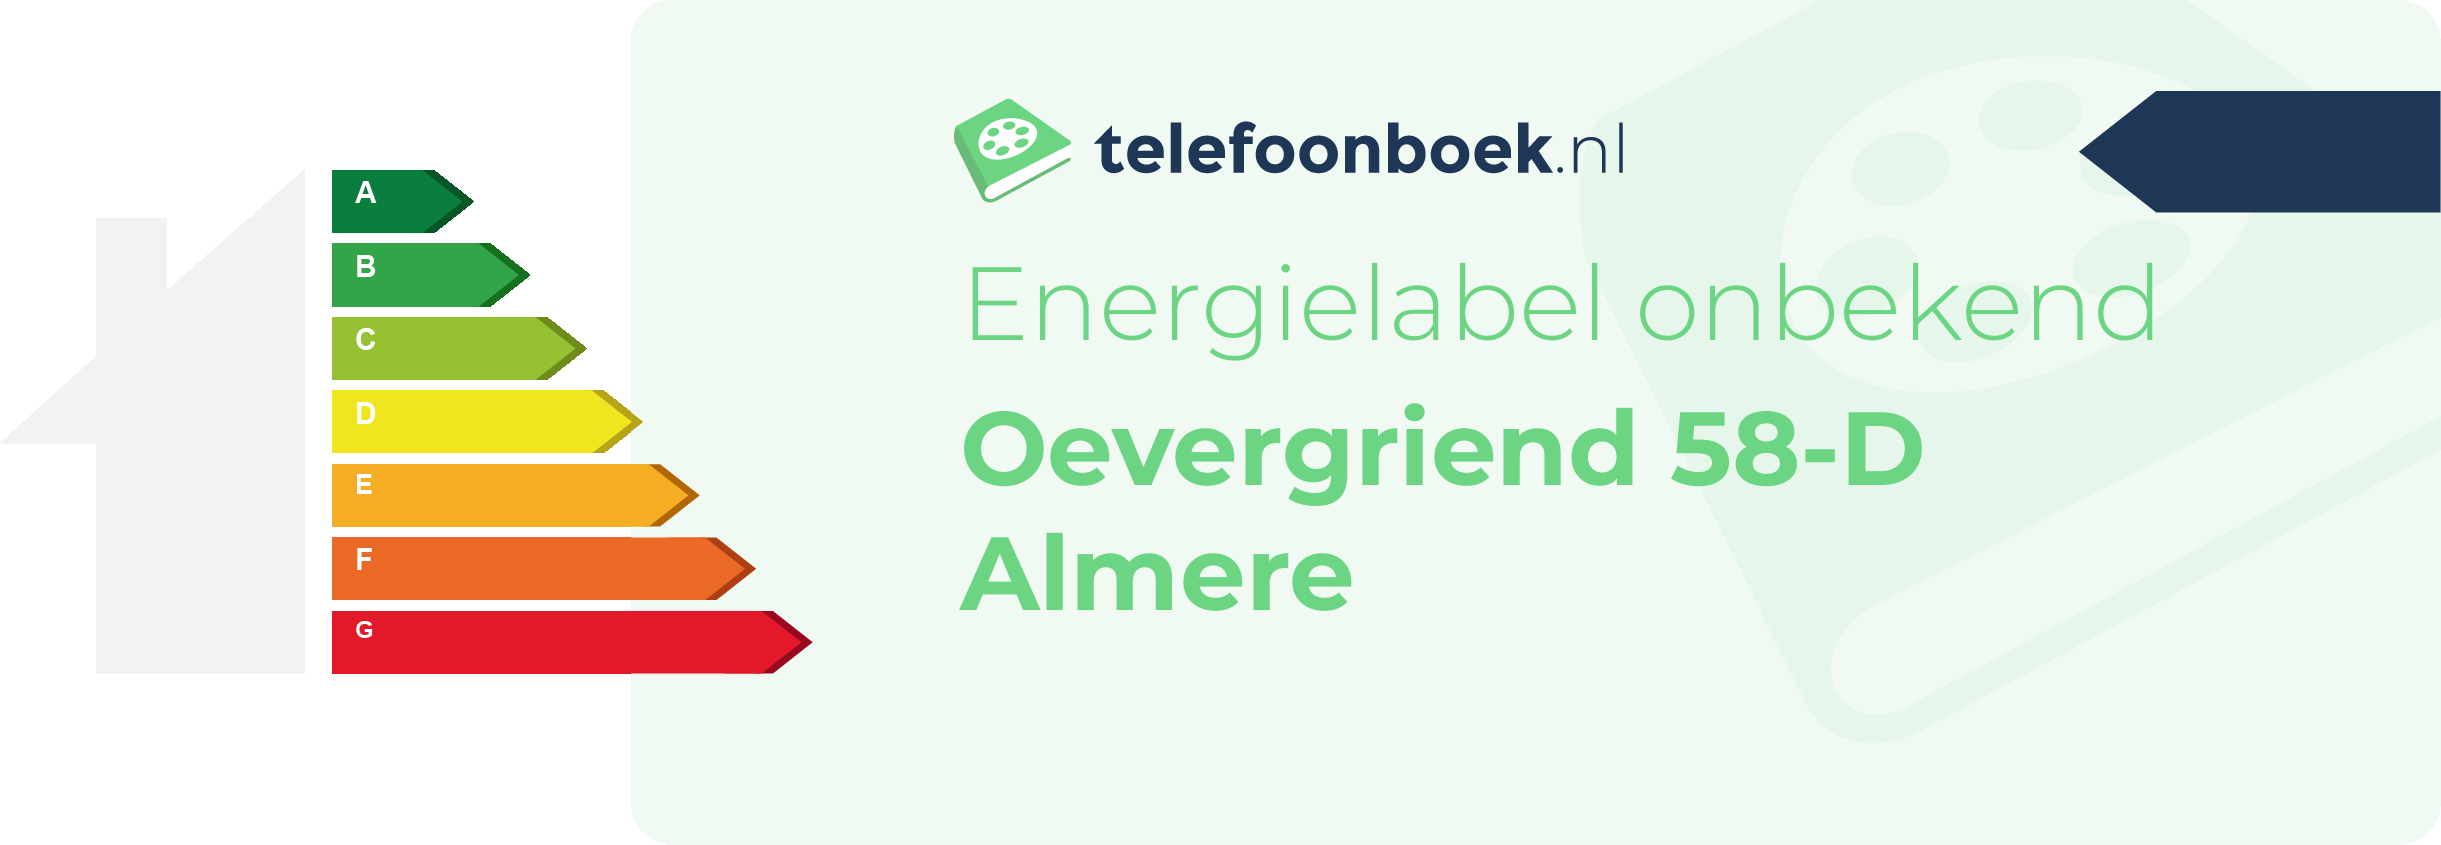 Energielabel Oevergriend 58-D Almere